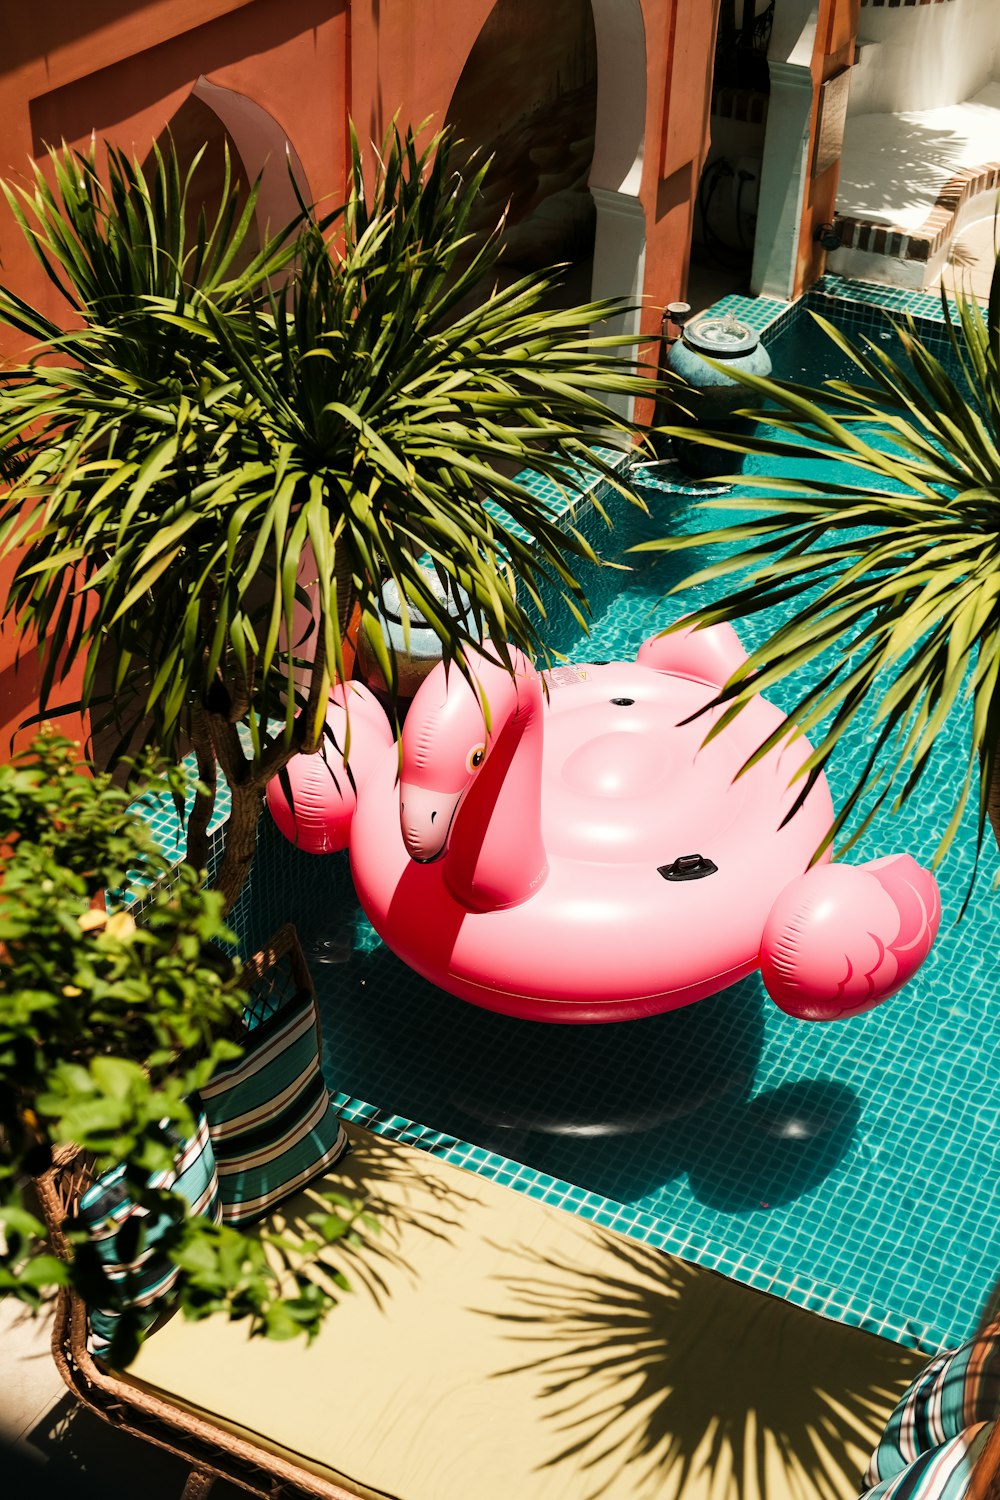 a pink inflatable pig sitting next to a potted plant